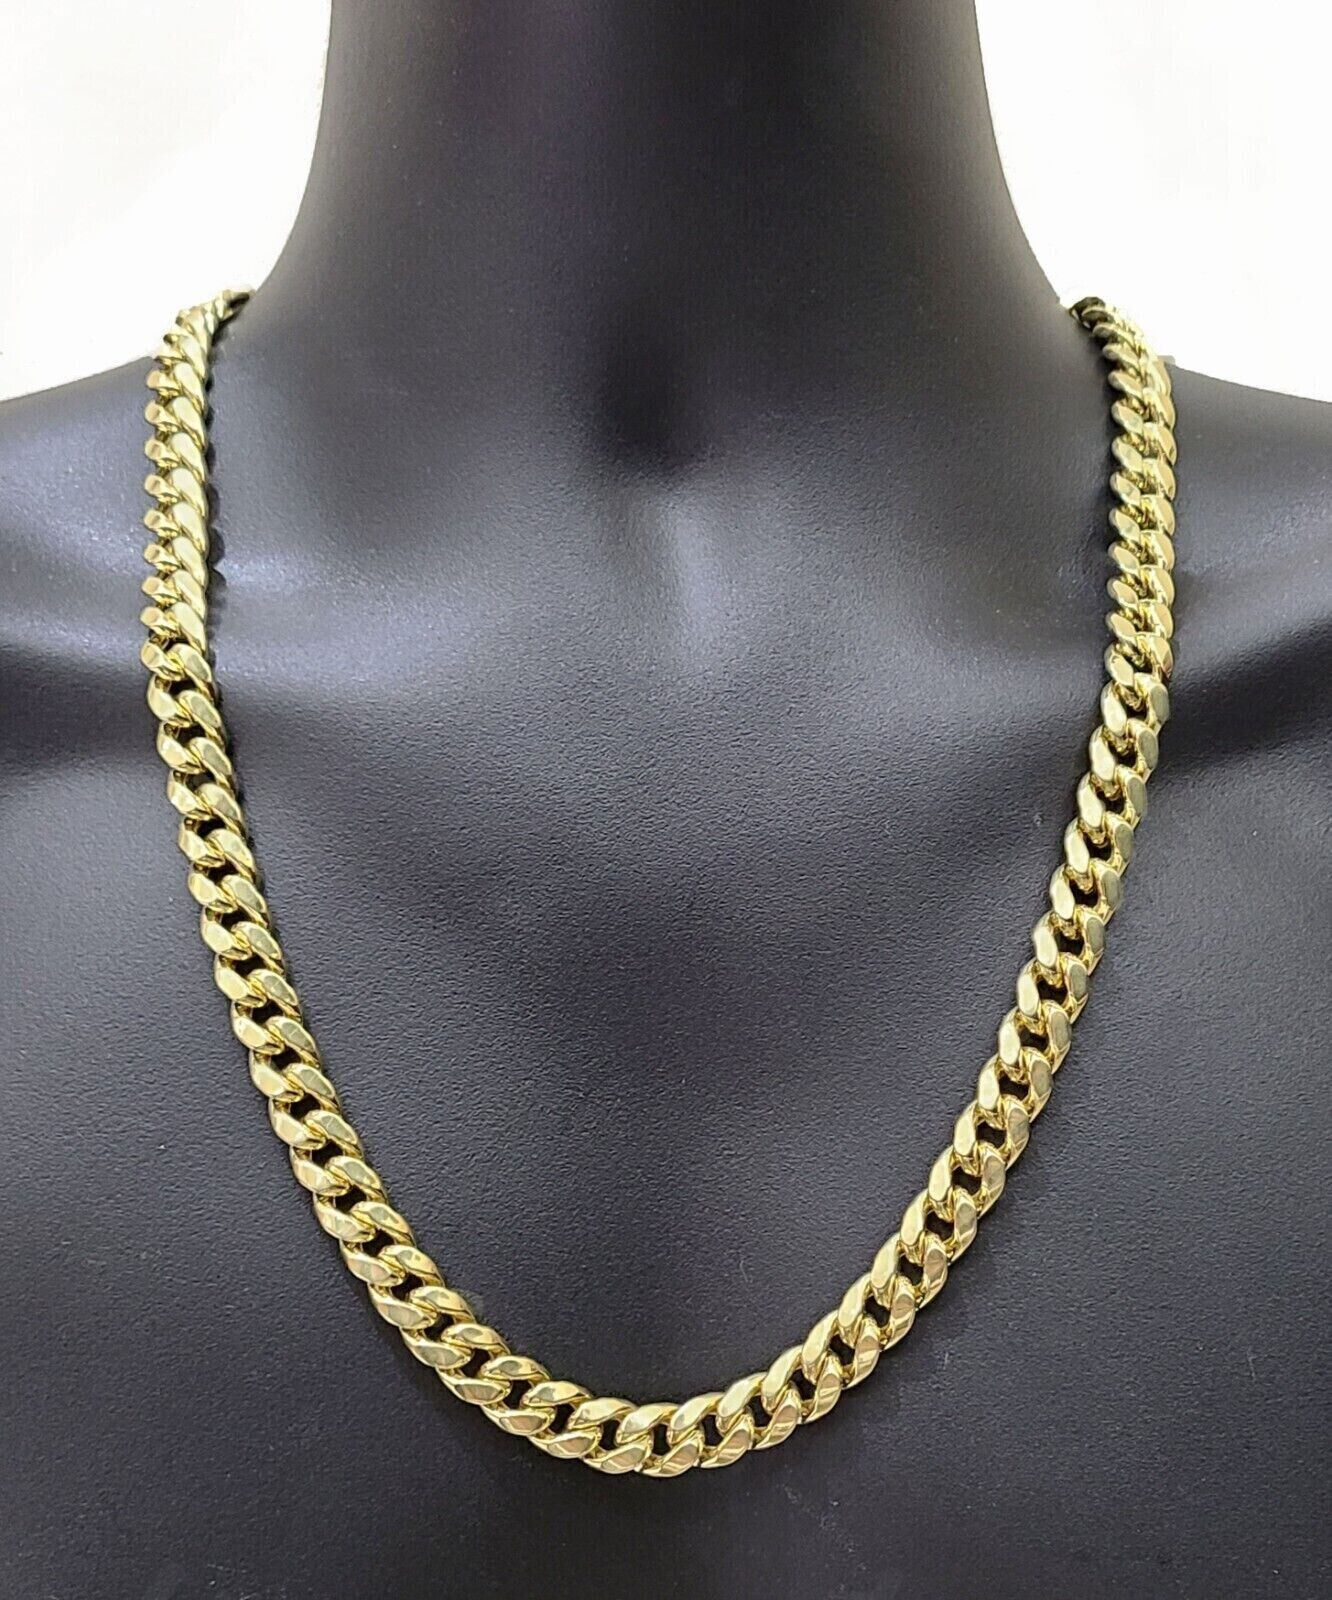 Real 14k Gold Chain 22 Inch Miami Cuban Link Necklace 9mm Strong Mens 14KT Gold